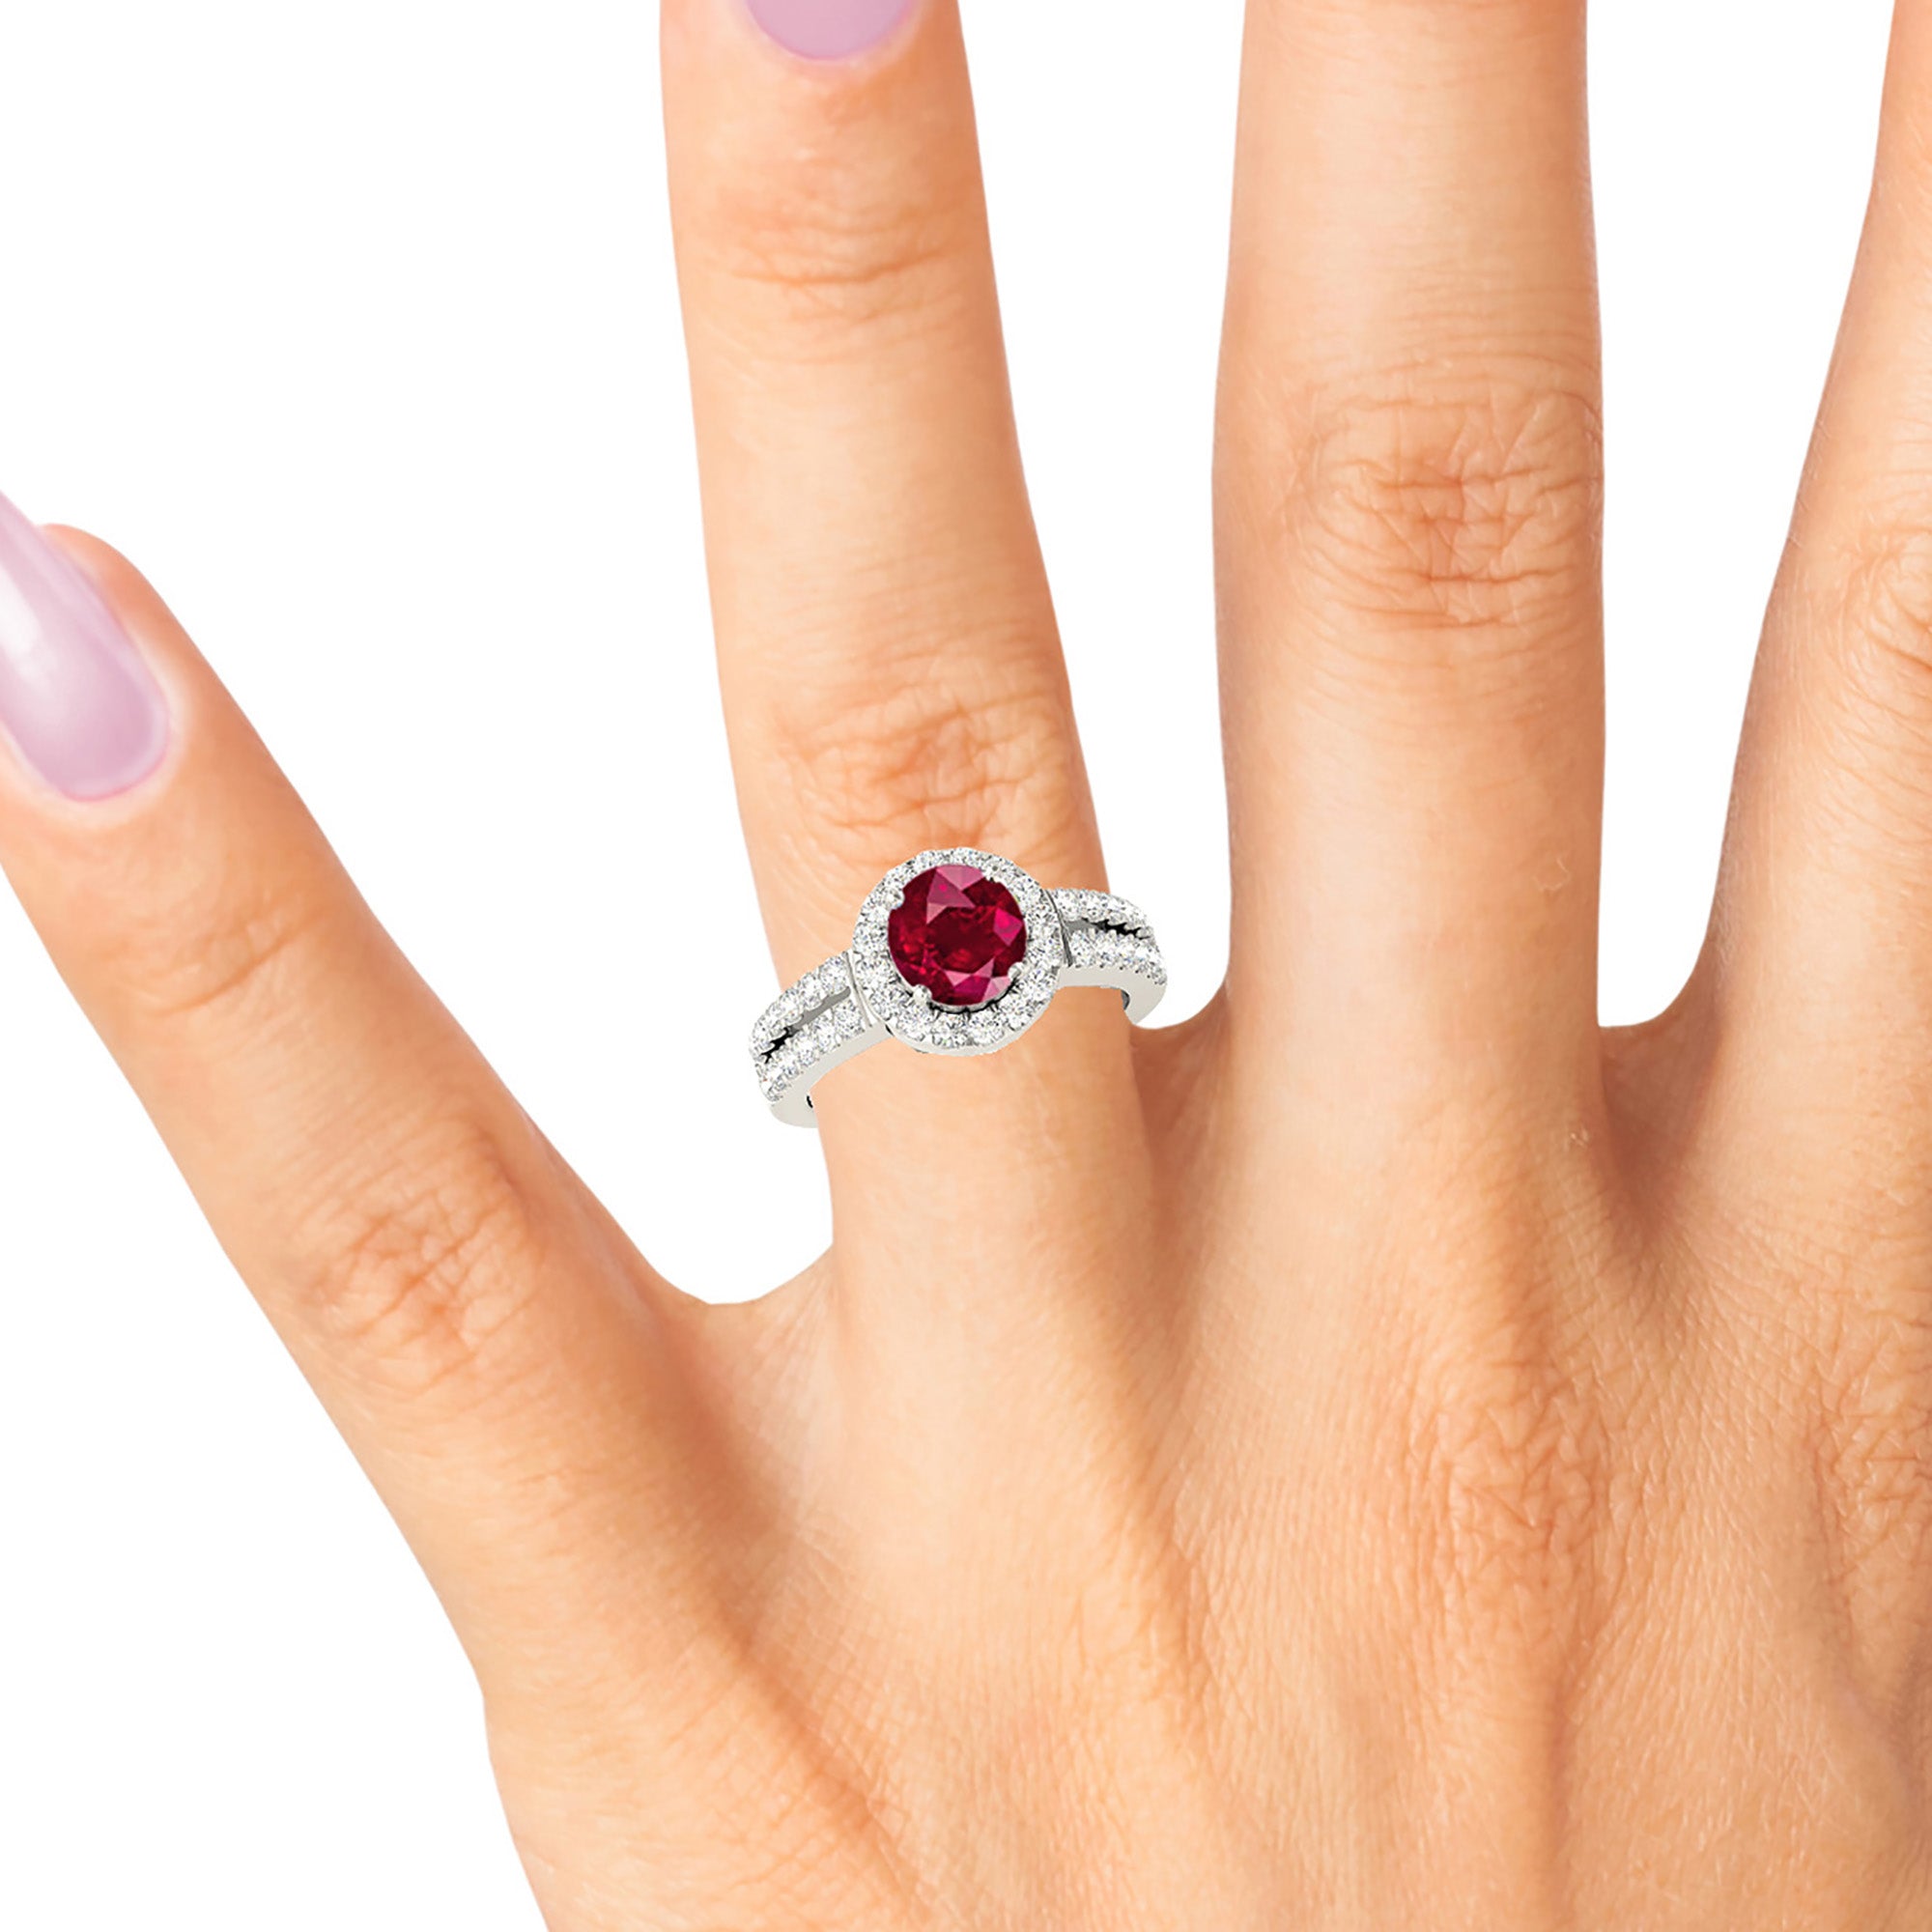 1.35 ct. Genuine Ruby Ring With 0.40 ctw. Diamond Halo And Double row Diamond Band | Round Ruby Halo Ring-in 14K/18K White, Yellow, Rose Gold and Platinum - Christmas Jewelry Gift -VIRABYANI